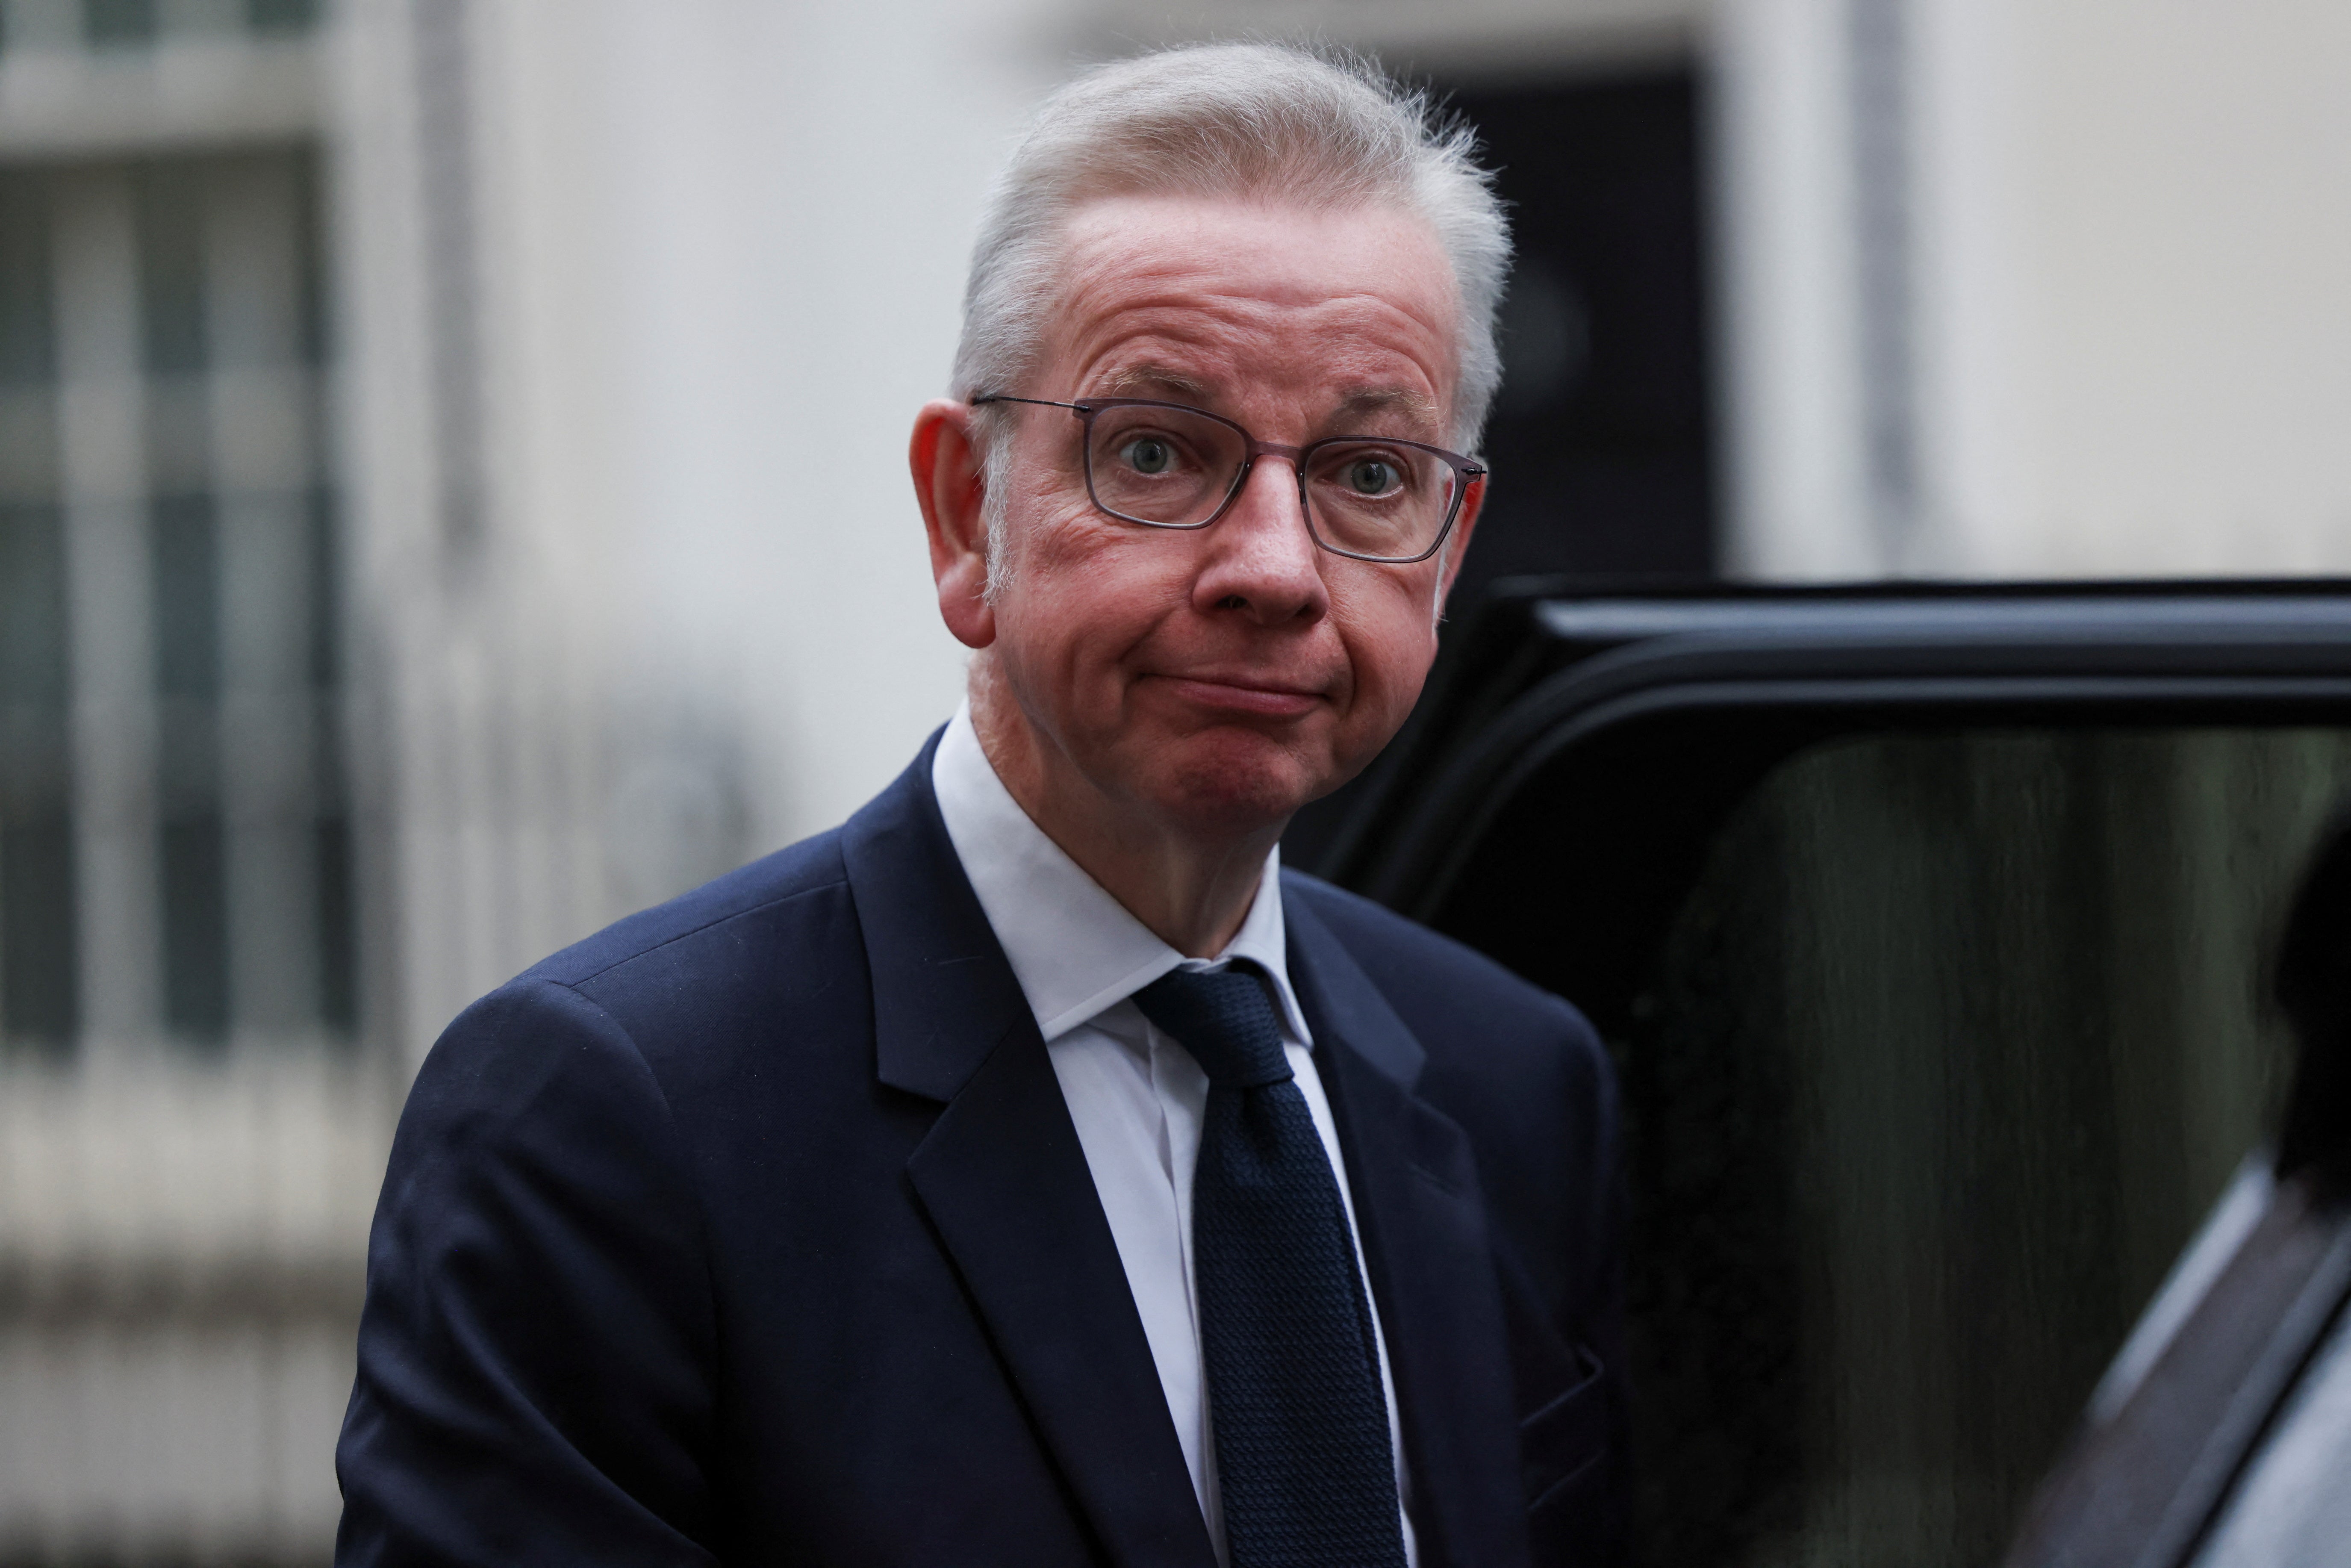 Michael Gove said it was time for a “new generation” to lead